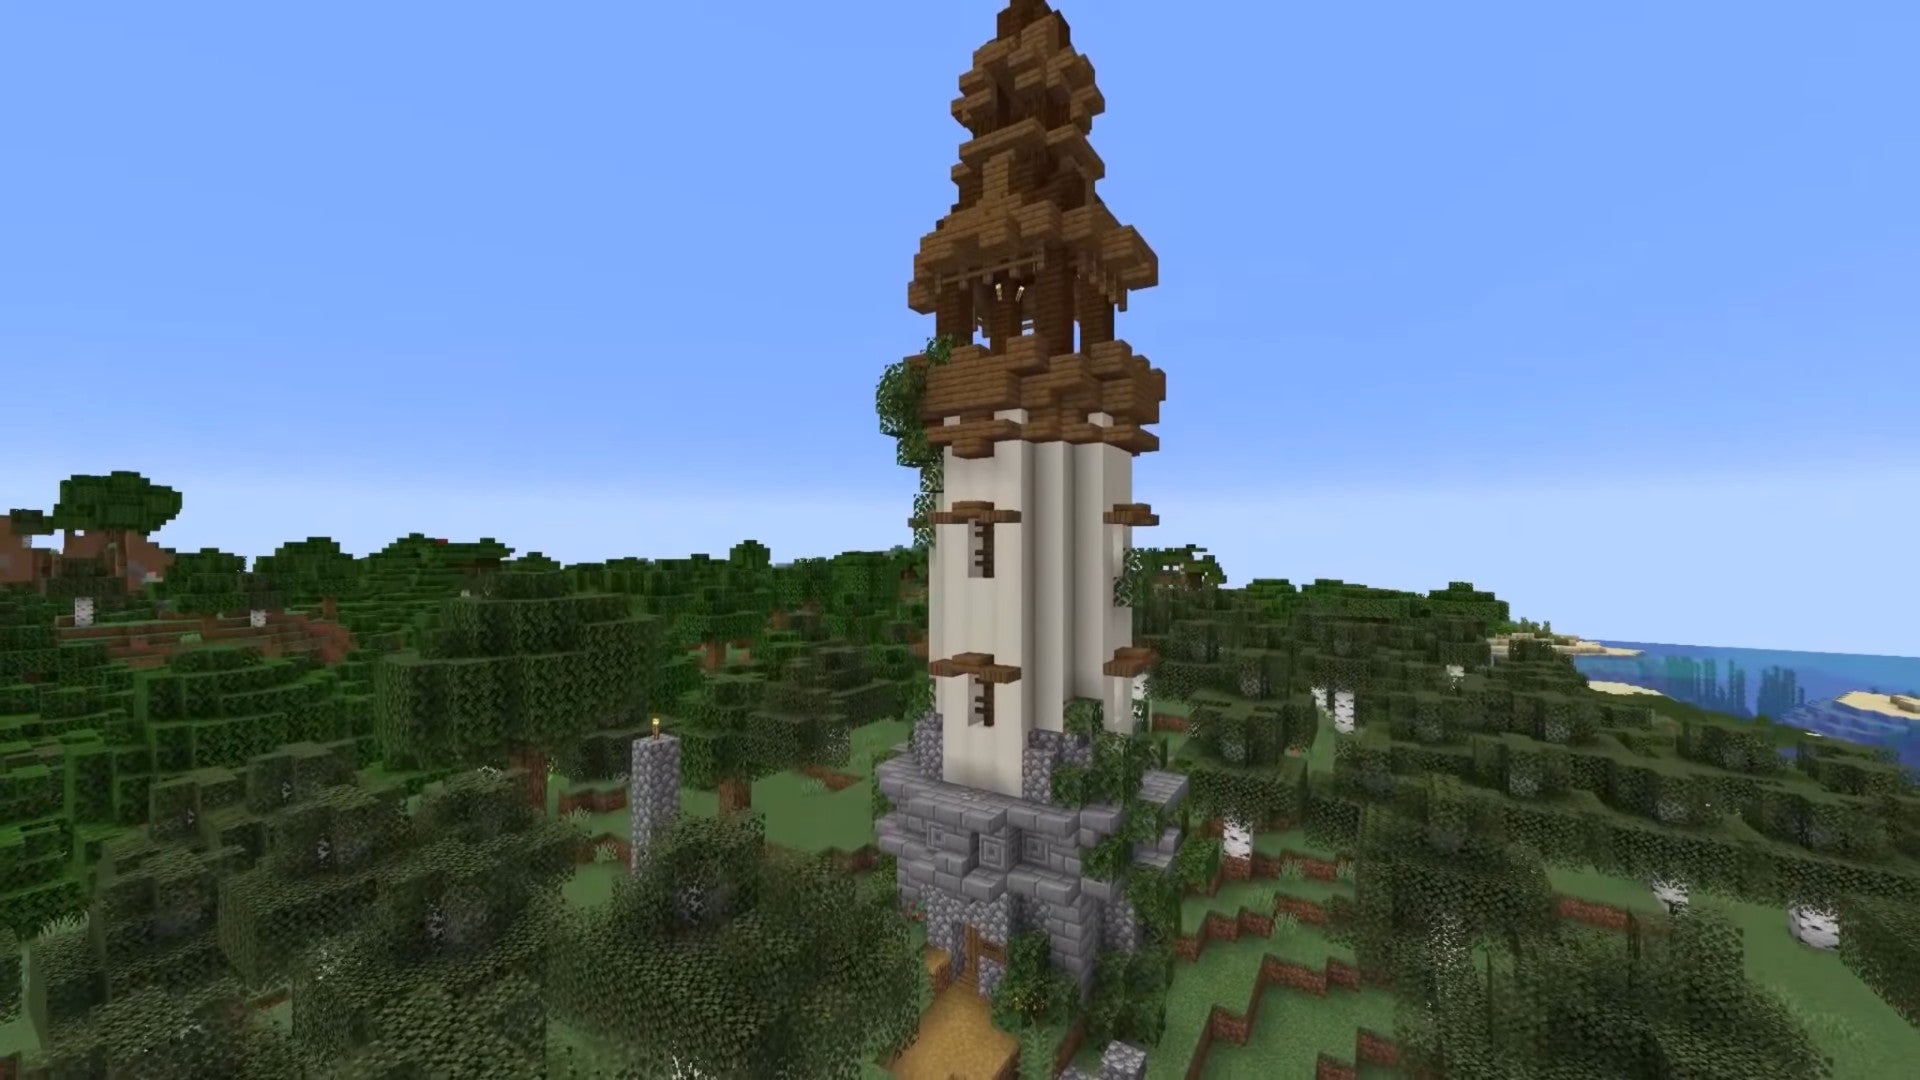 simple tower built using stone and wood towering over a forest in minecraft